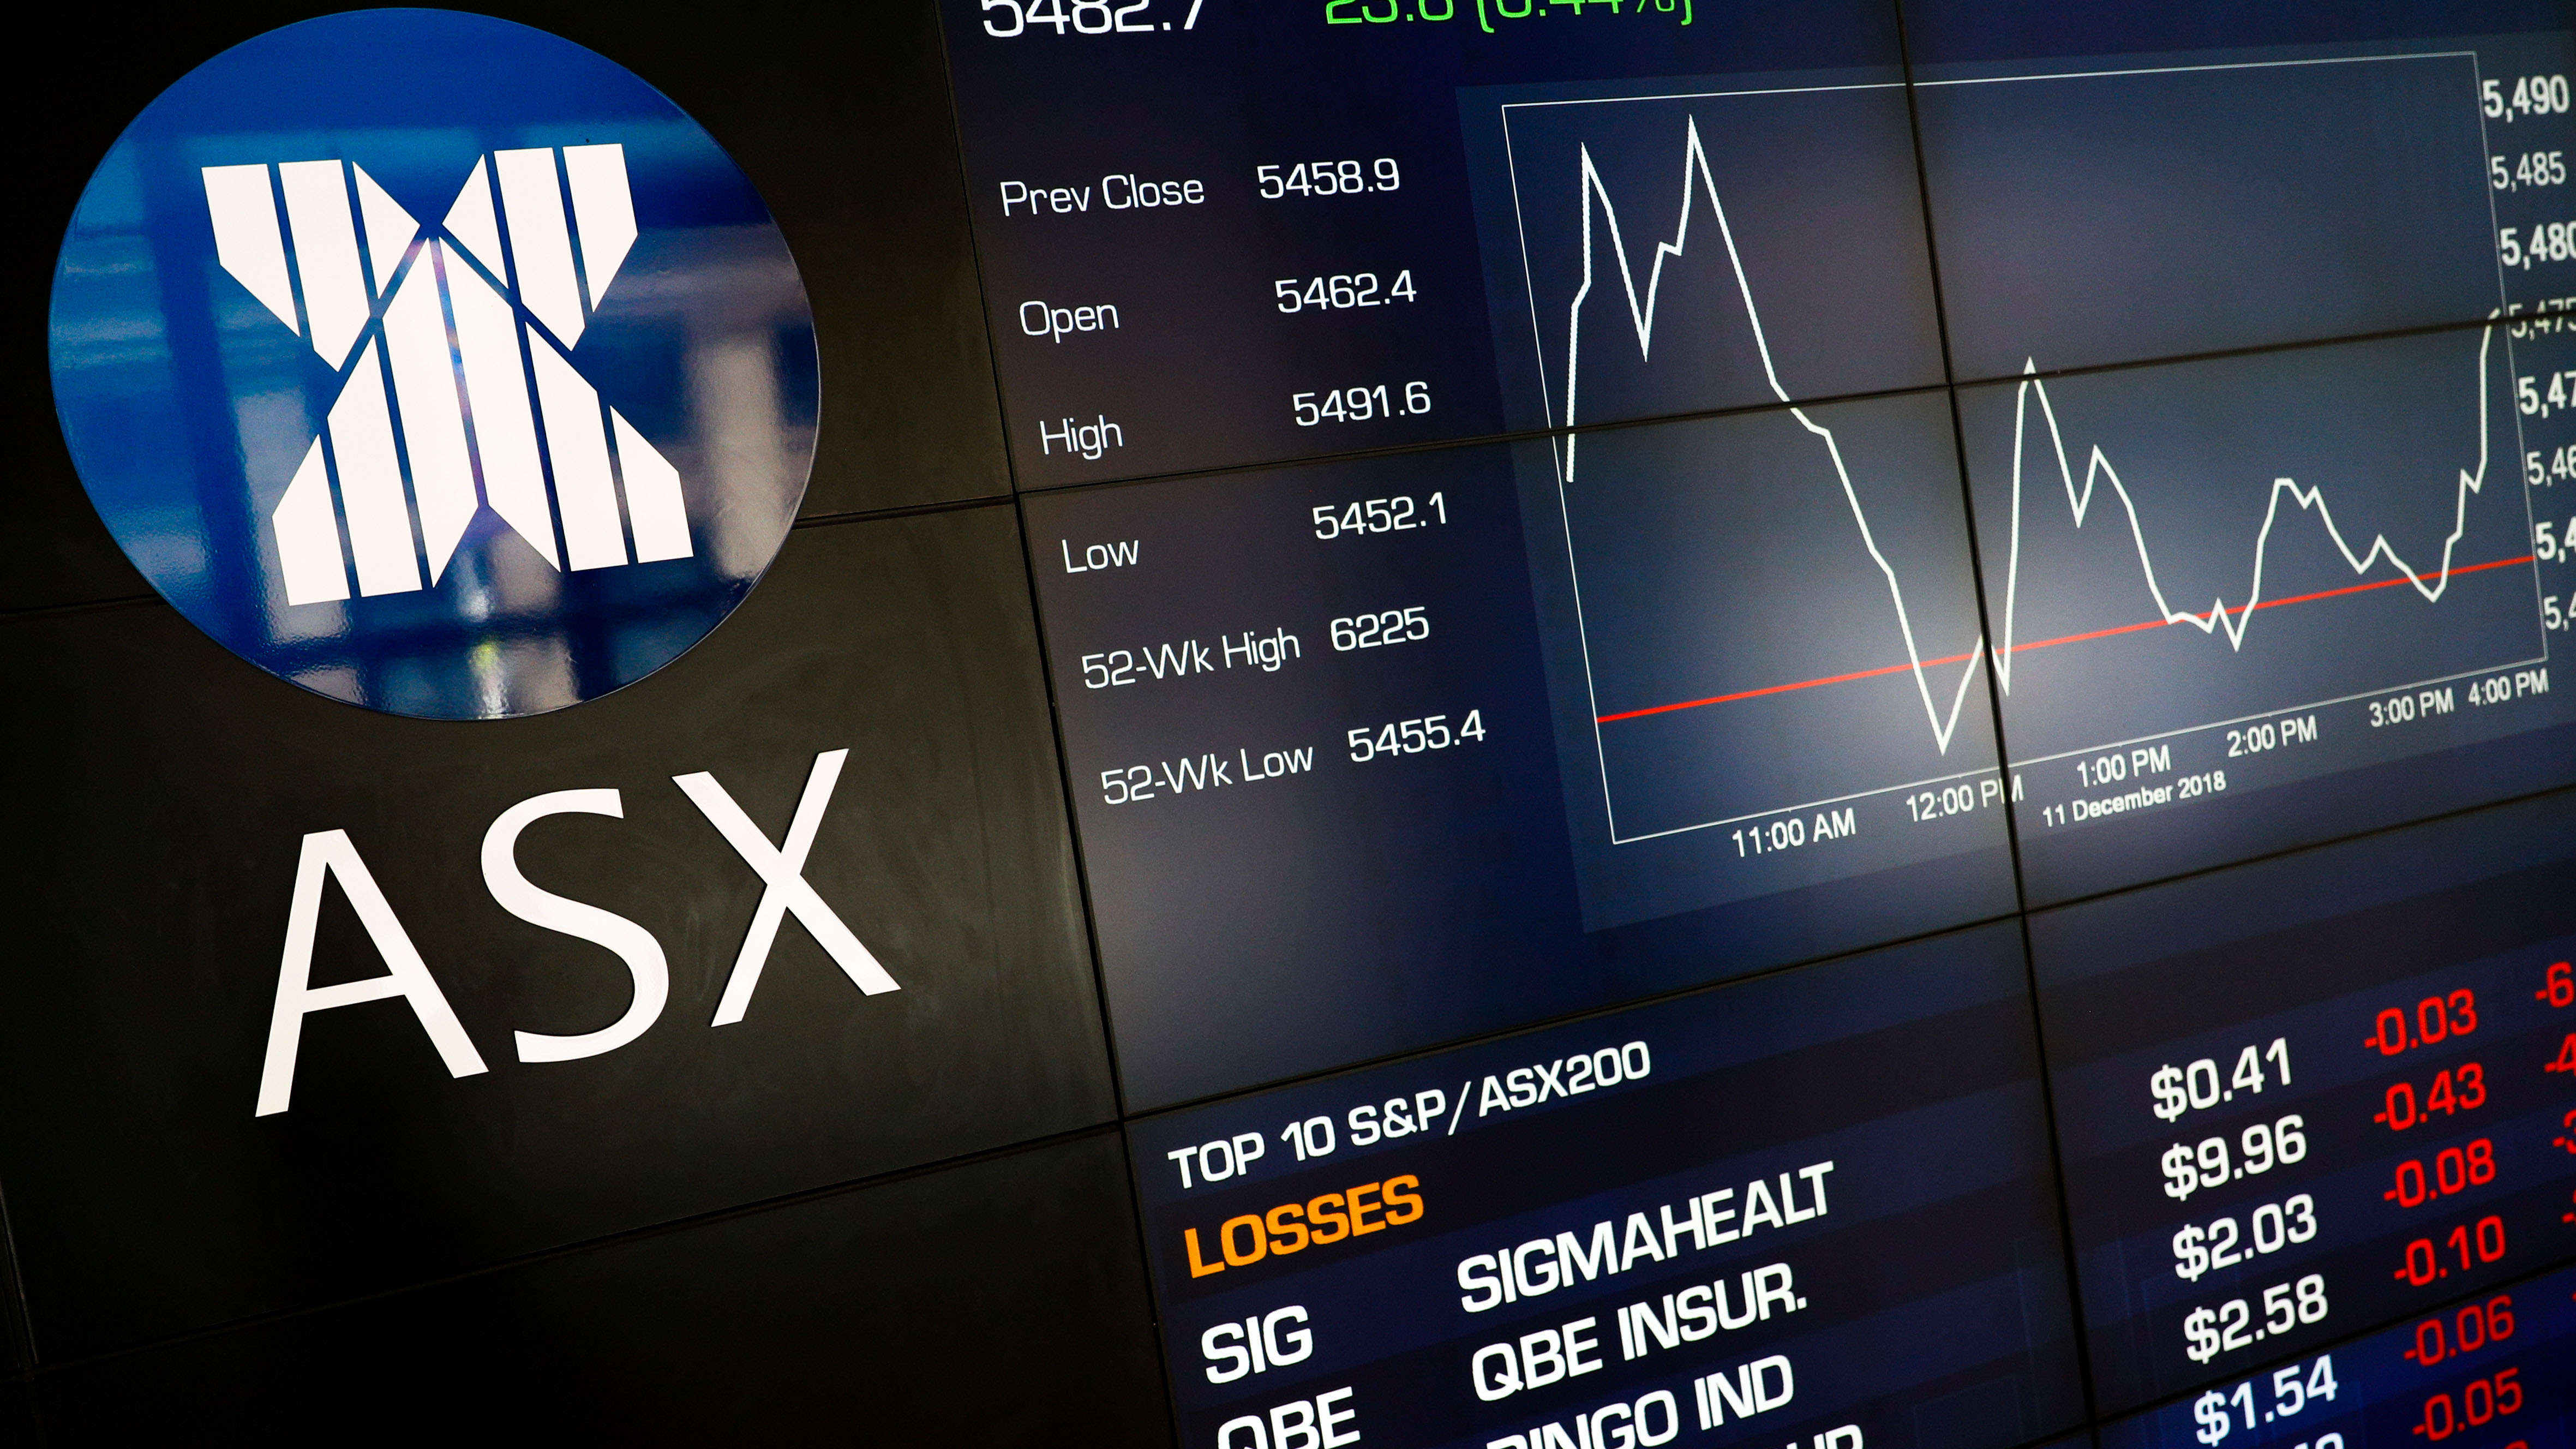 Asx cryptocurrency stocks vanguard cryptocurrency funds